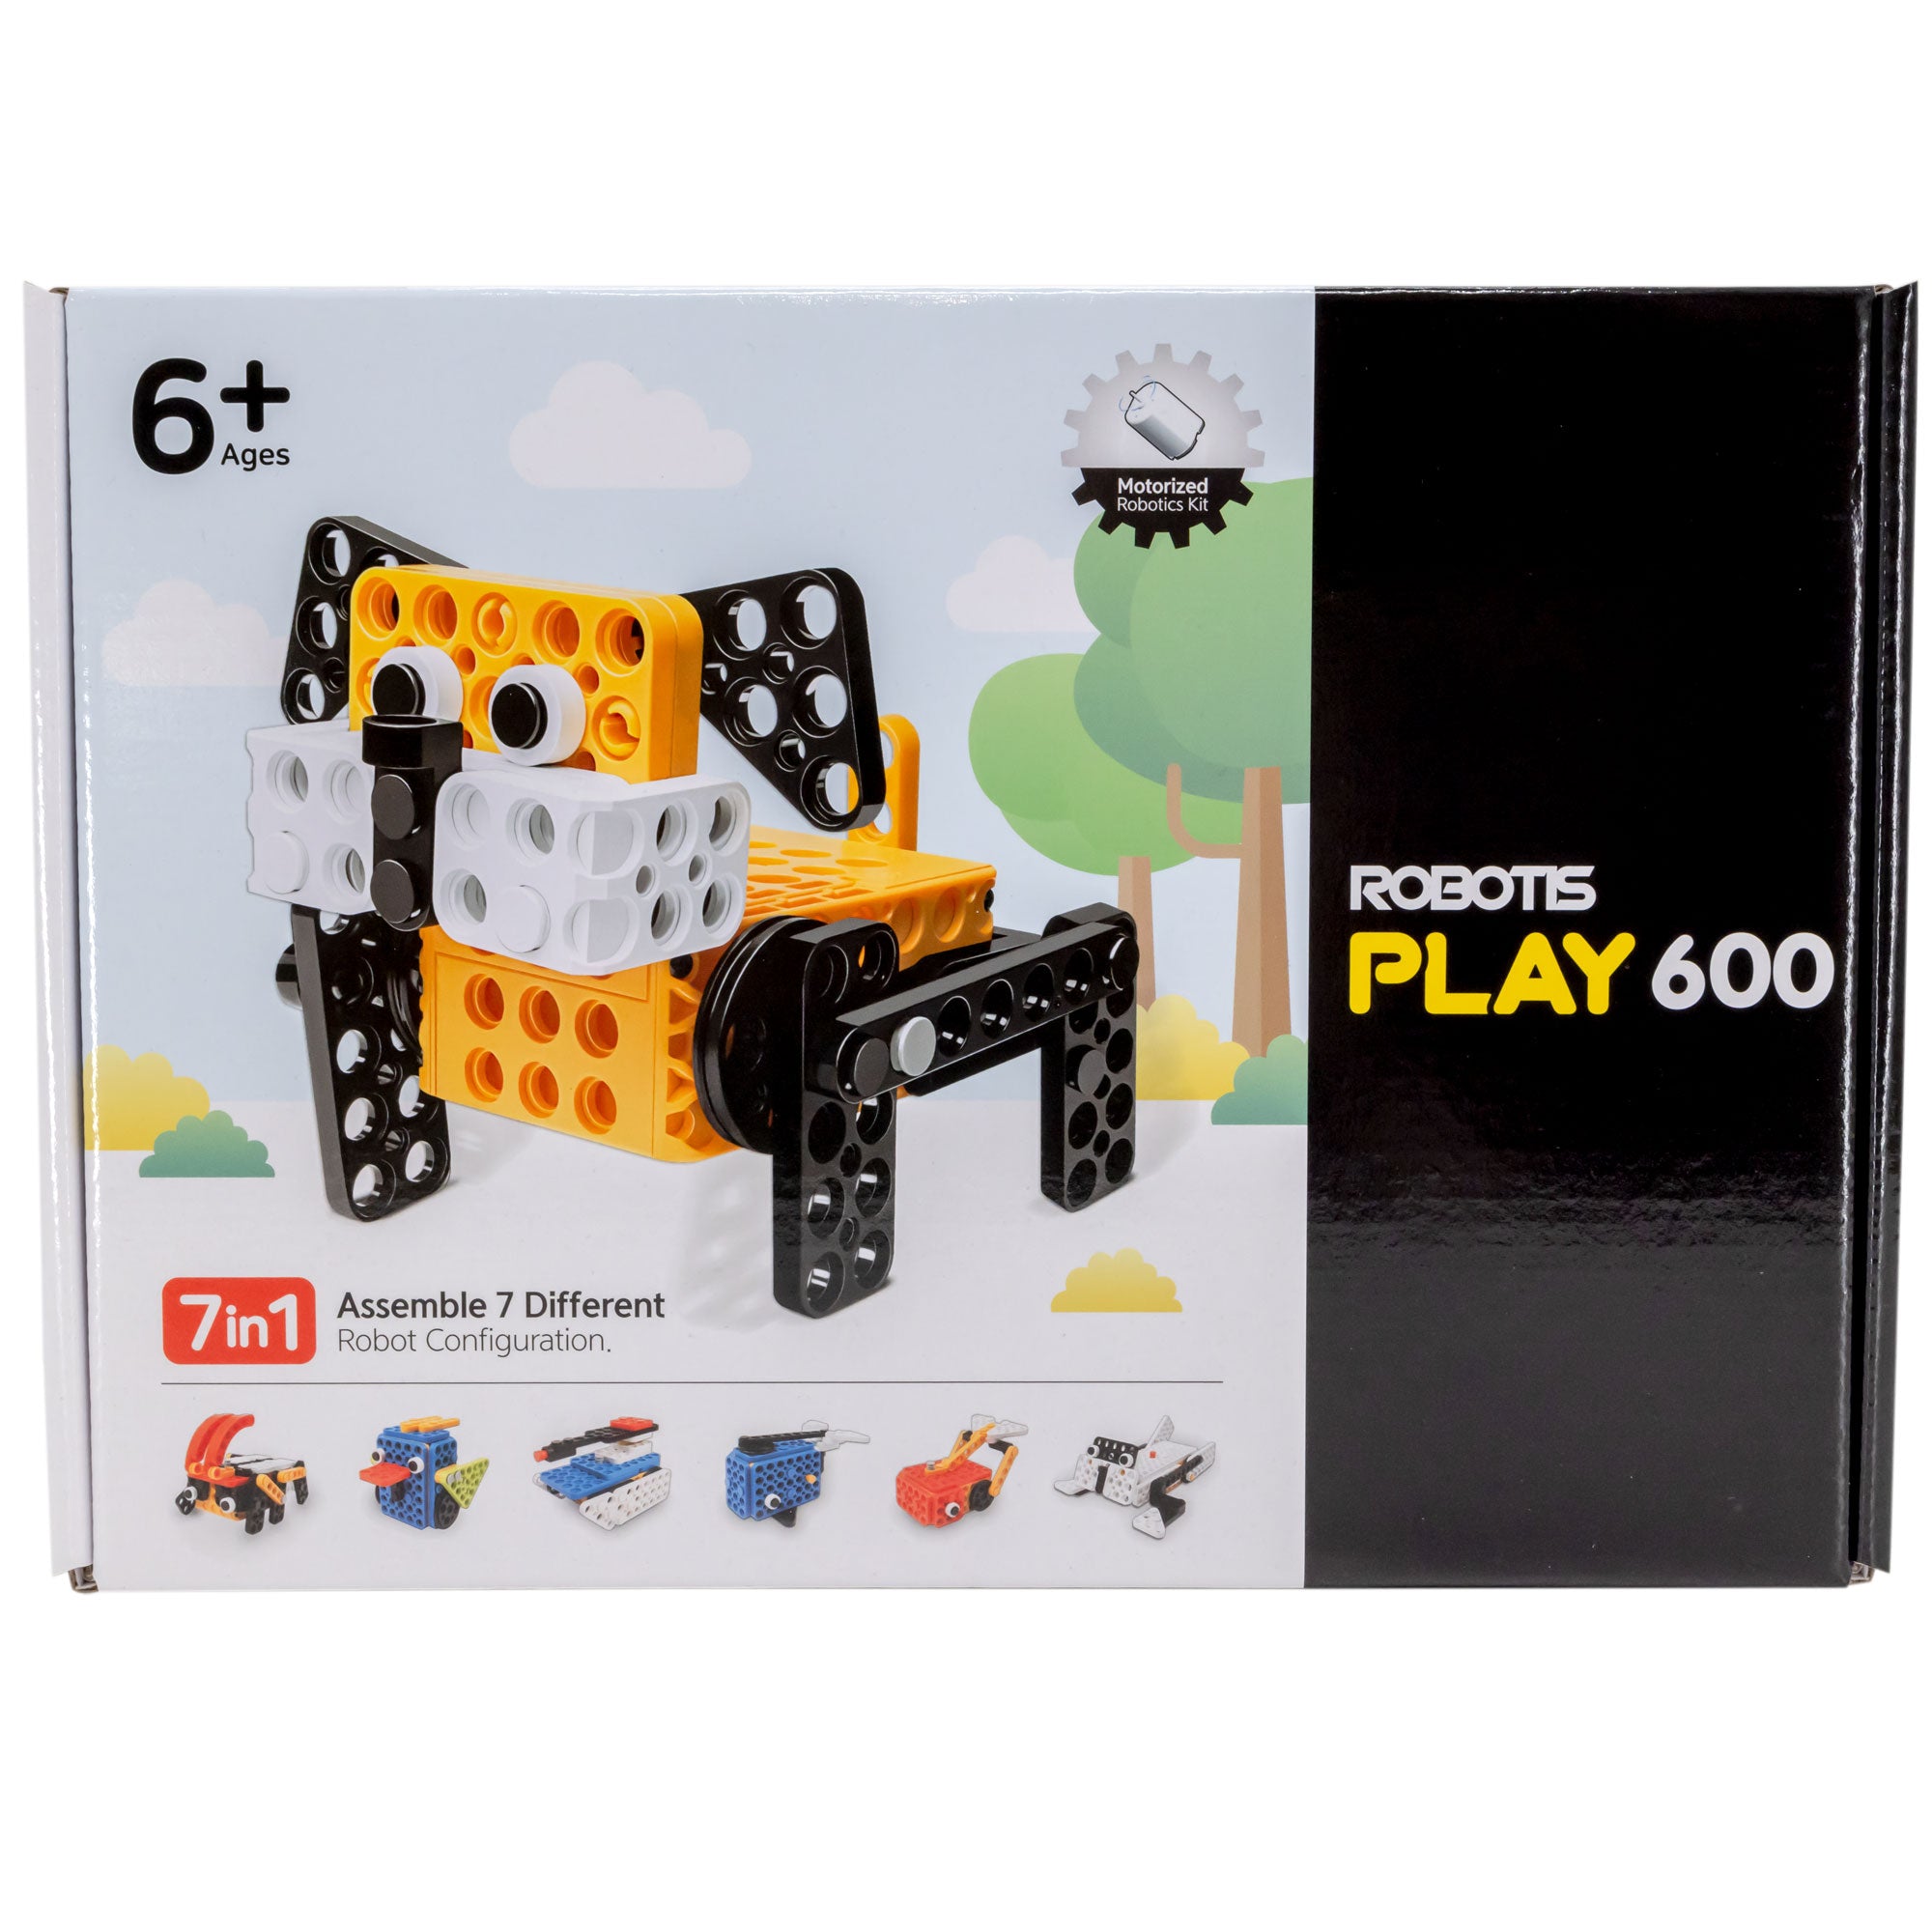 Robotis Play 600 Pets box cover. On the left shows a dog shaped robot with a background of faded trees, bushed, and sky. Under this shows 6 other pet option builds. To the left is a black strip with the item title.